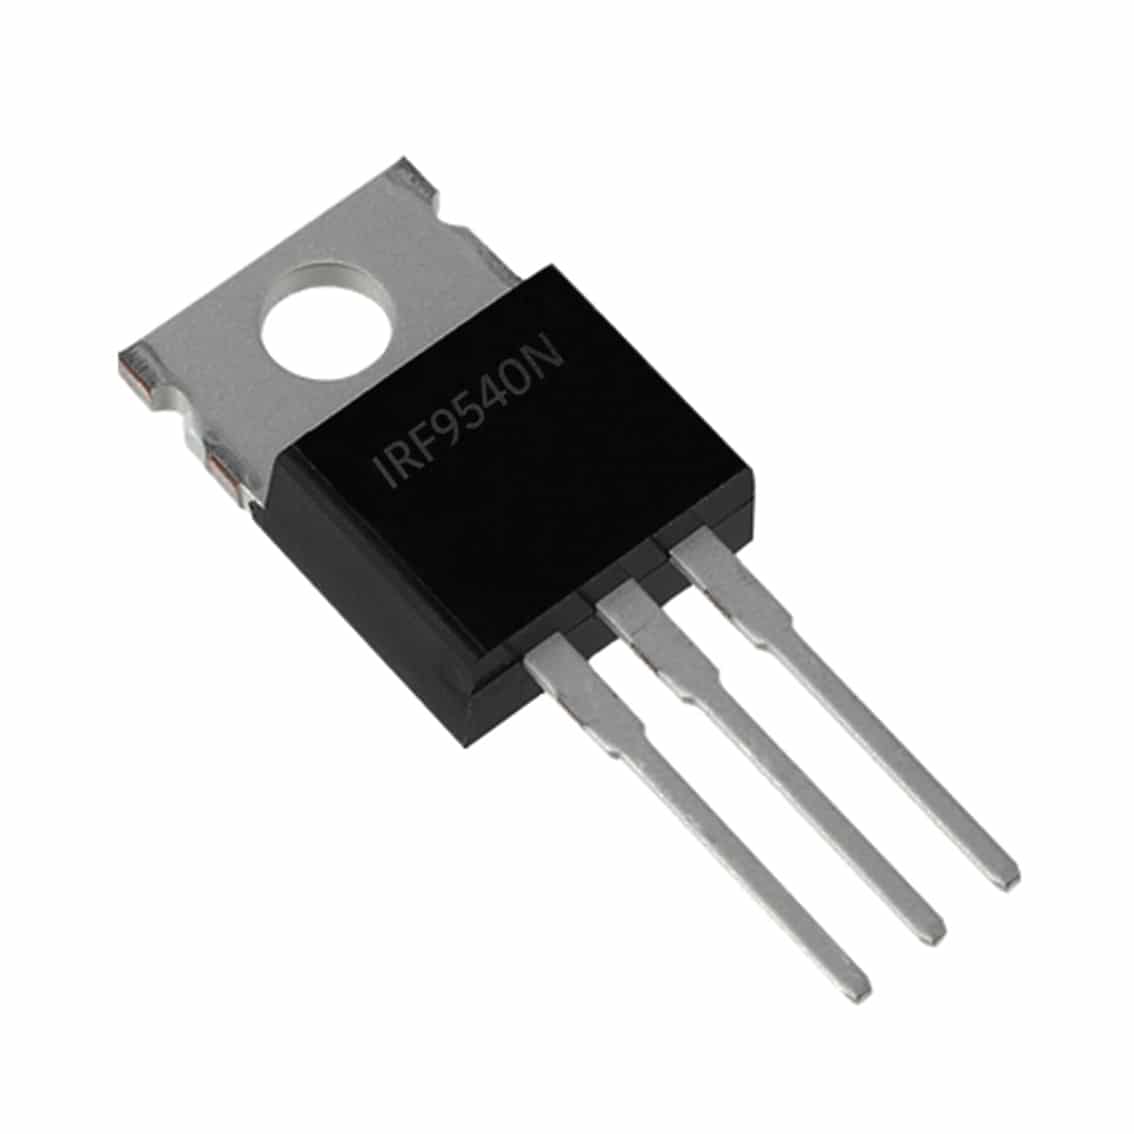 IRF9540 -100V -23A P-Channel MOSFET Transistor - Pack of 10 - Phipps  Electronics